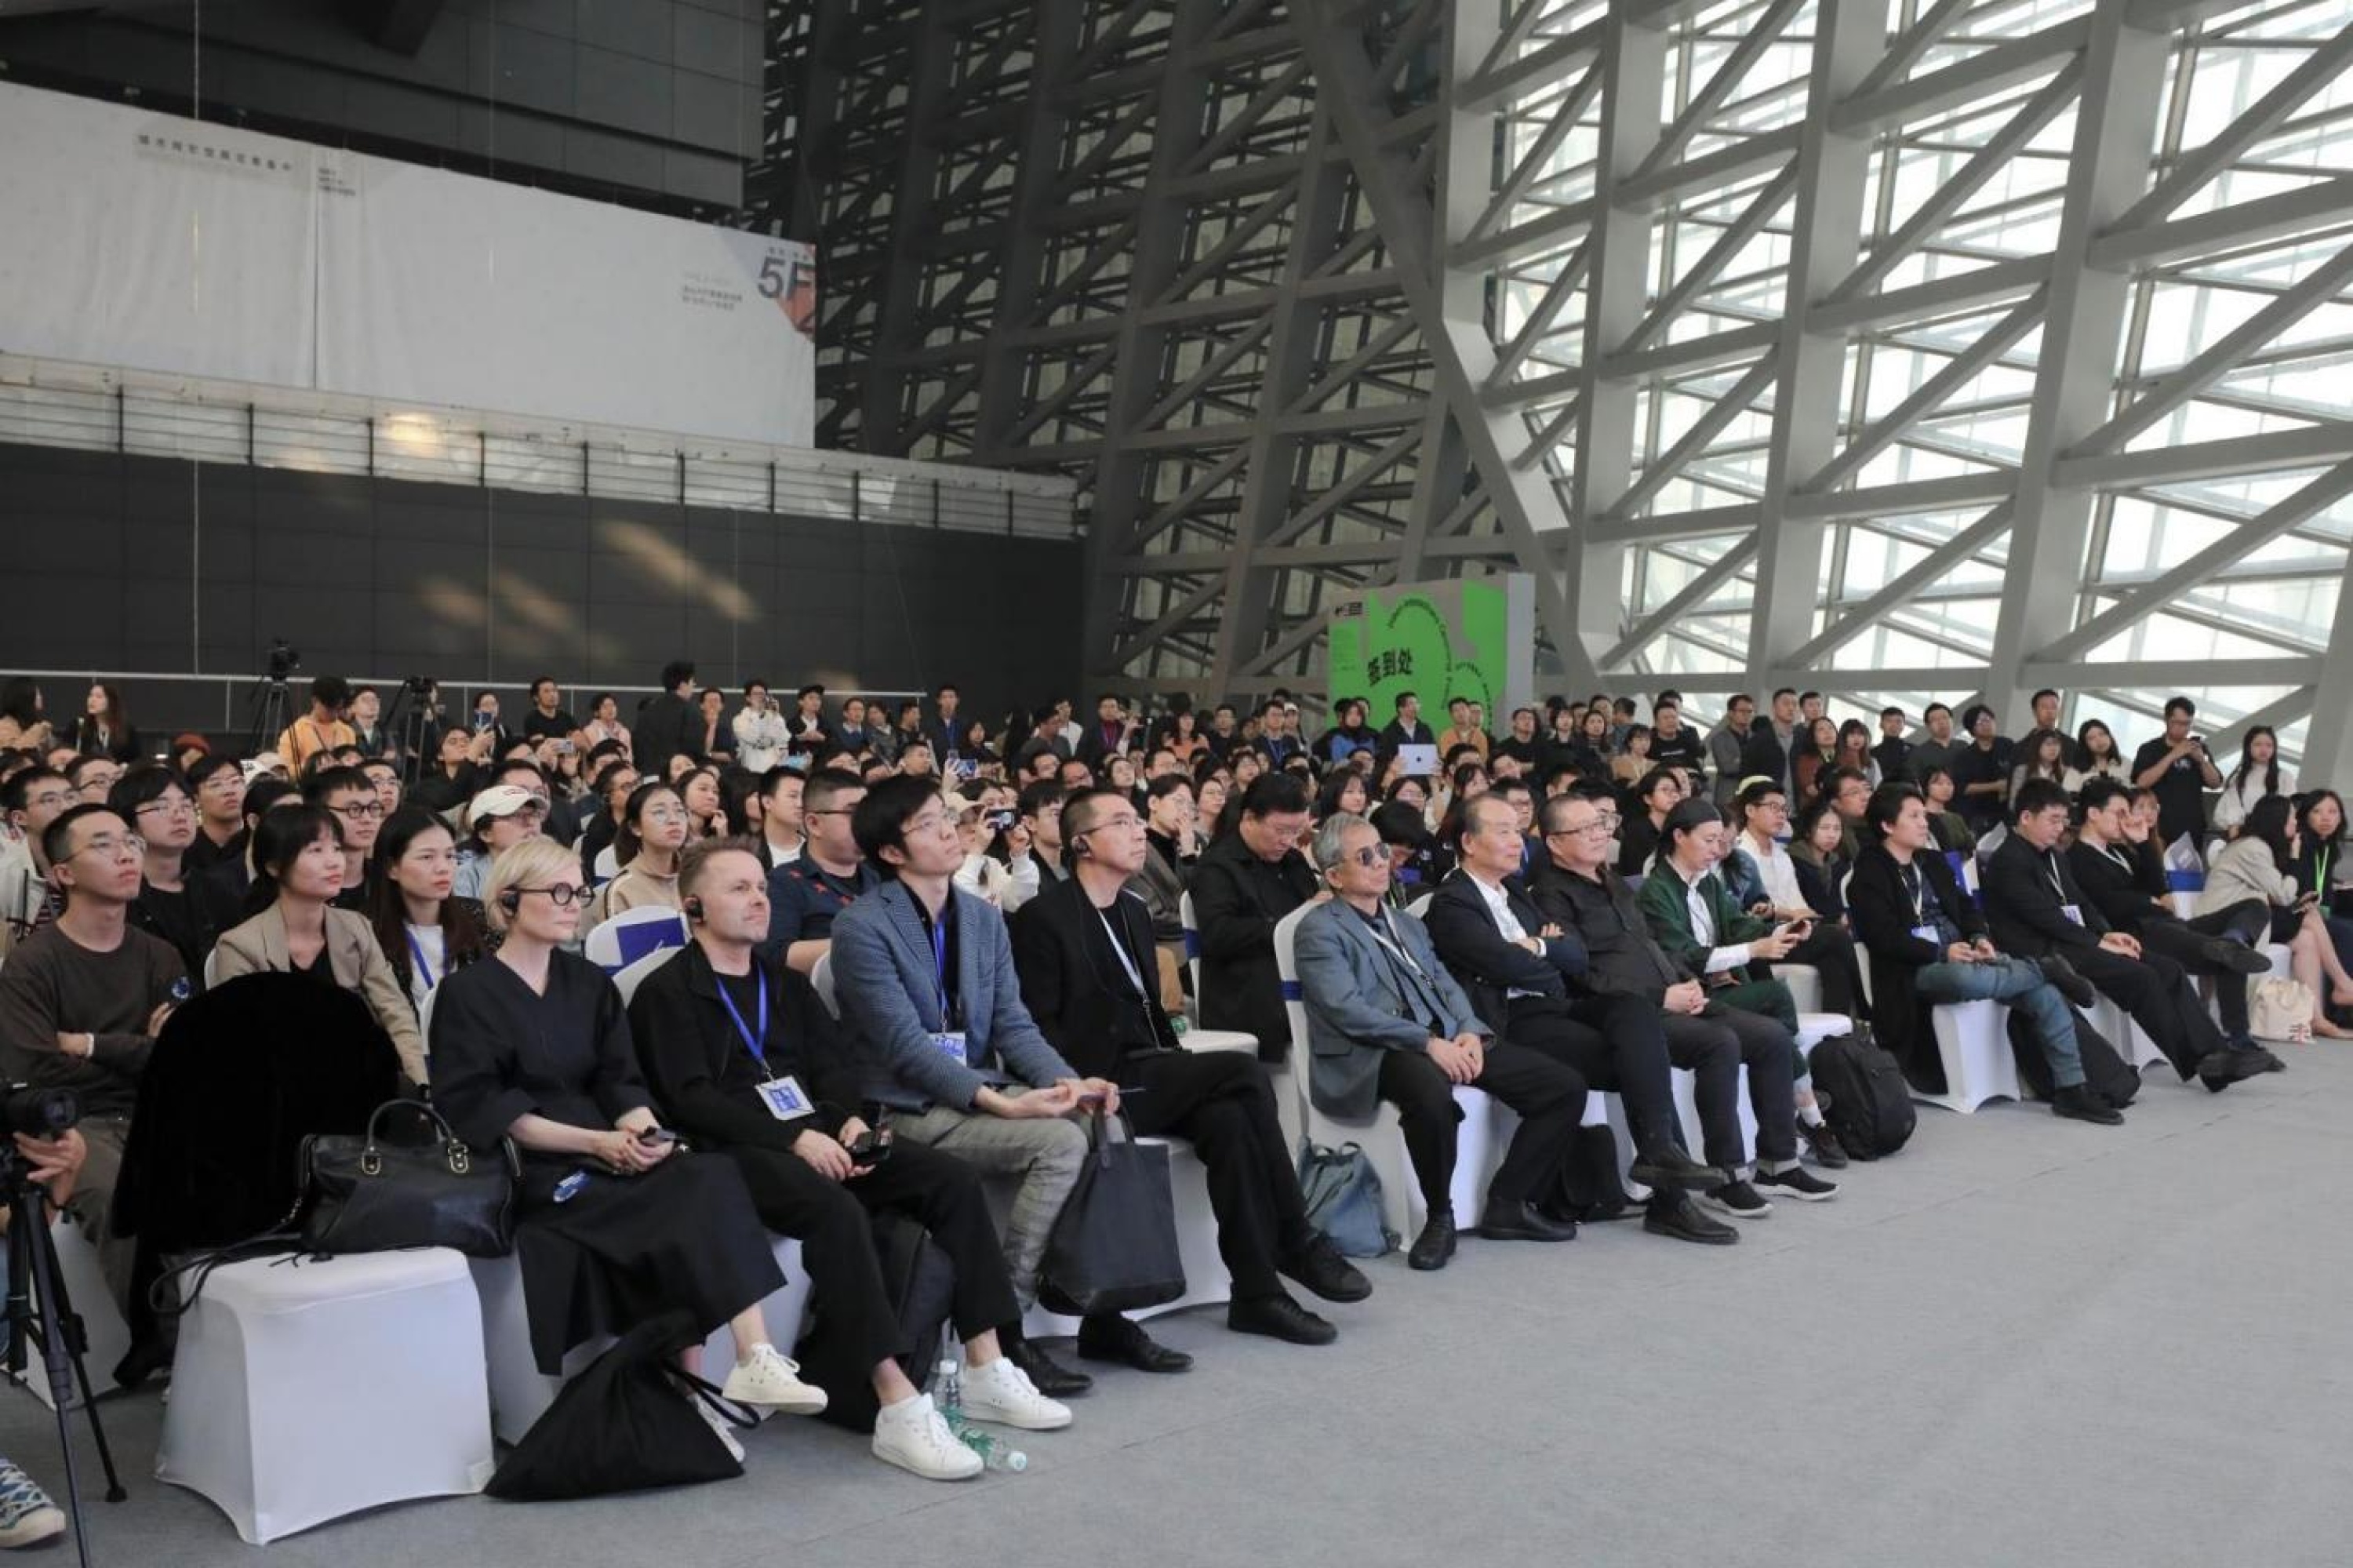 Zigeng Wang Attends the 8th Bi-City Biennale of Urbanism/Architecture (Shenzhen) Academic Seminar on “Interaction in the Ascending"